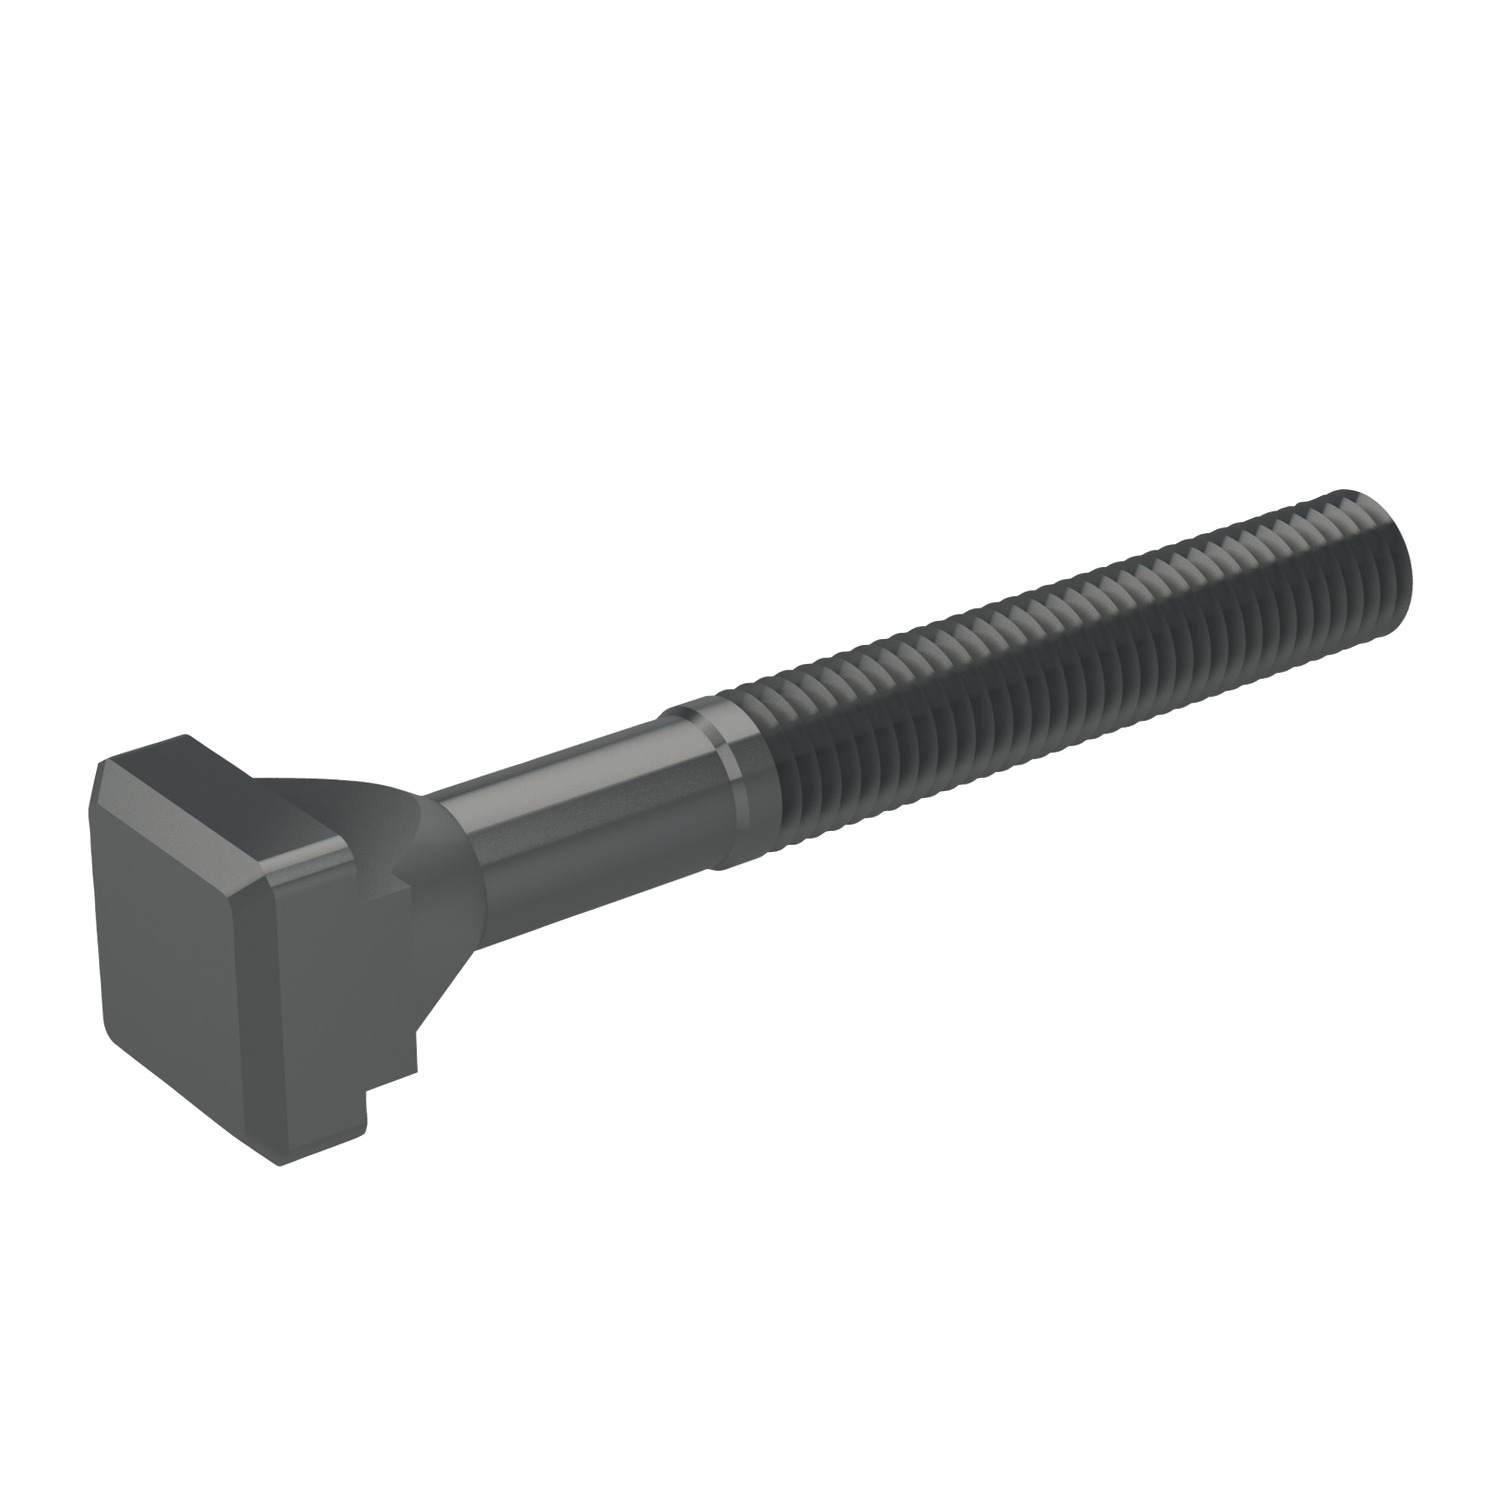 T-Slot Bolts T-Slot bolts in strength class 8,8/10,9 made from forged steel with rolled thread. Suitable fixture nuts & washers 24300,24400 and 25000.